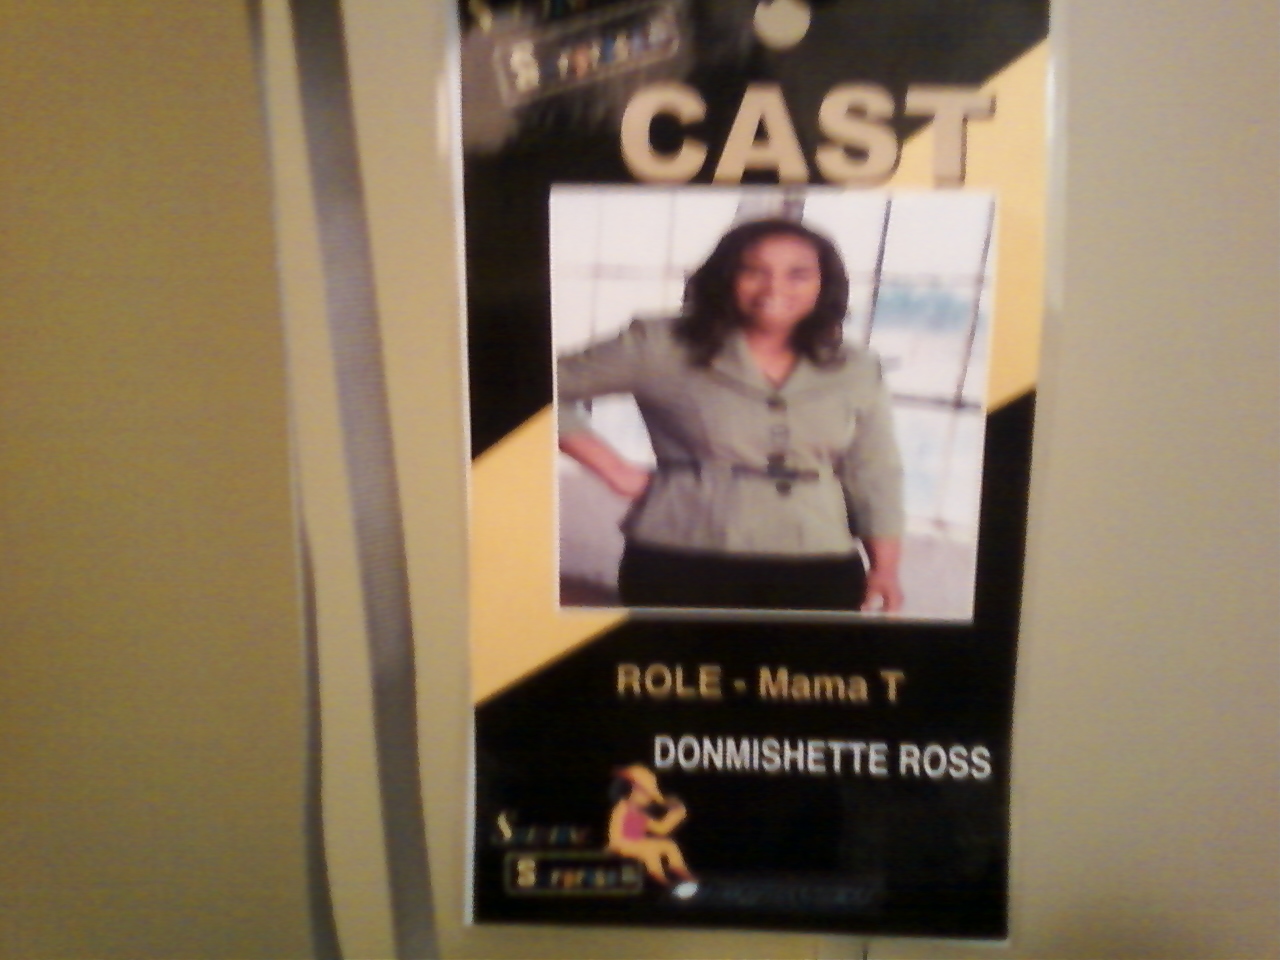 Donmishette Ross as Mama T on the movie 